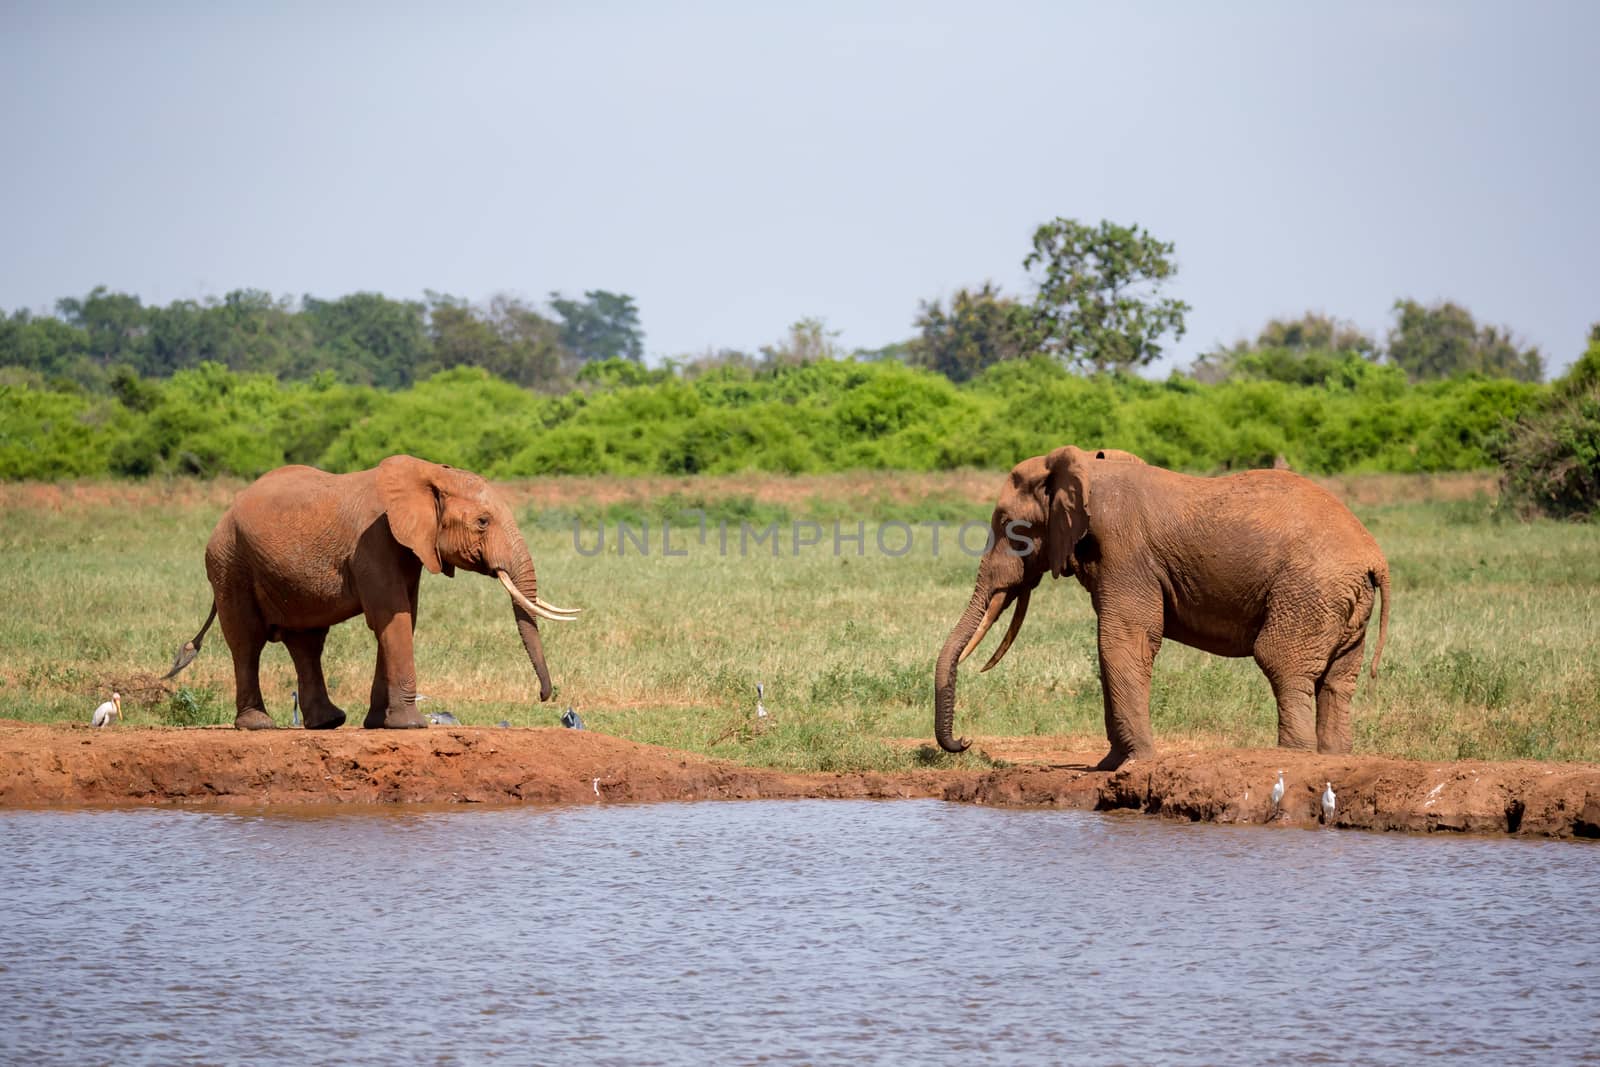 A waterhole in the savannah with some red elephants by 25ehaag6